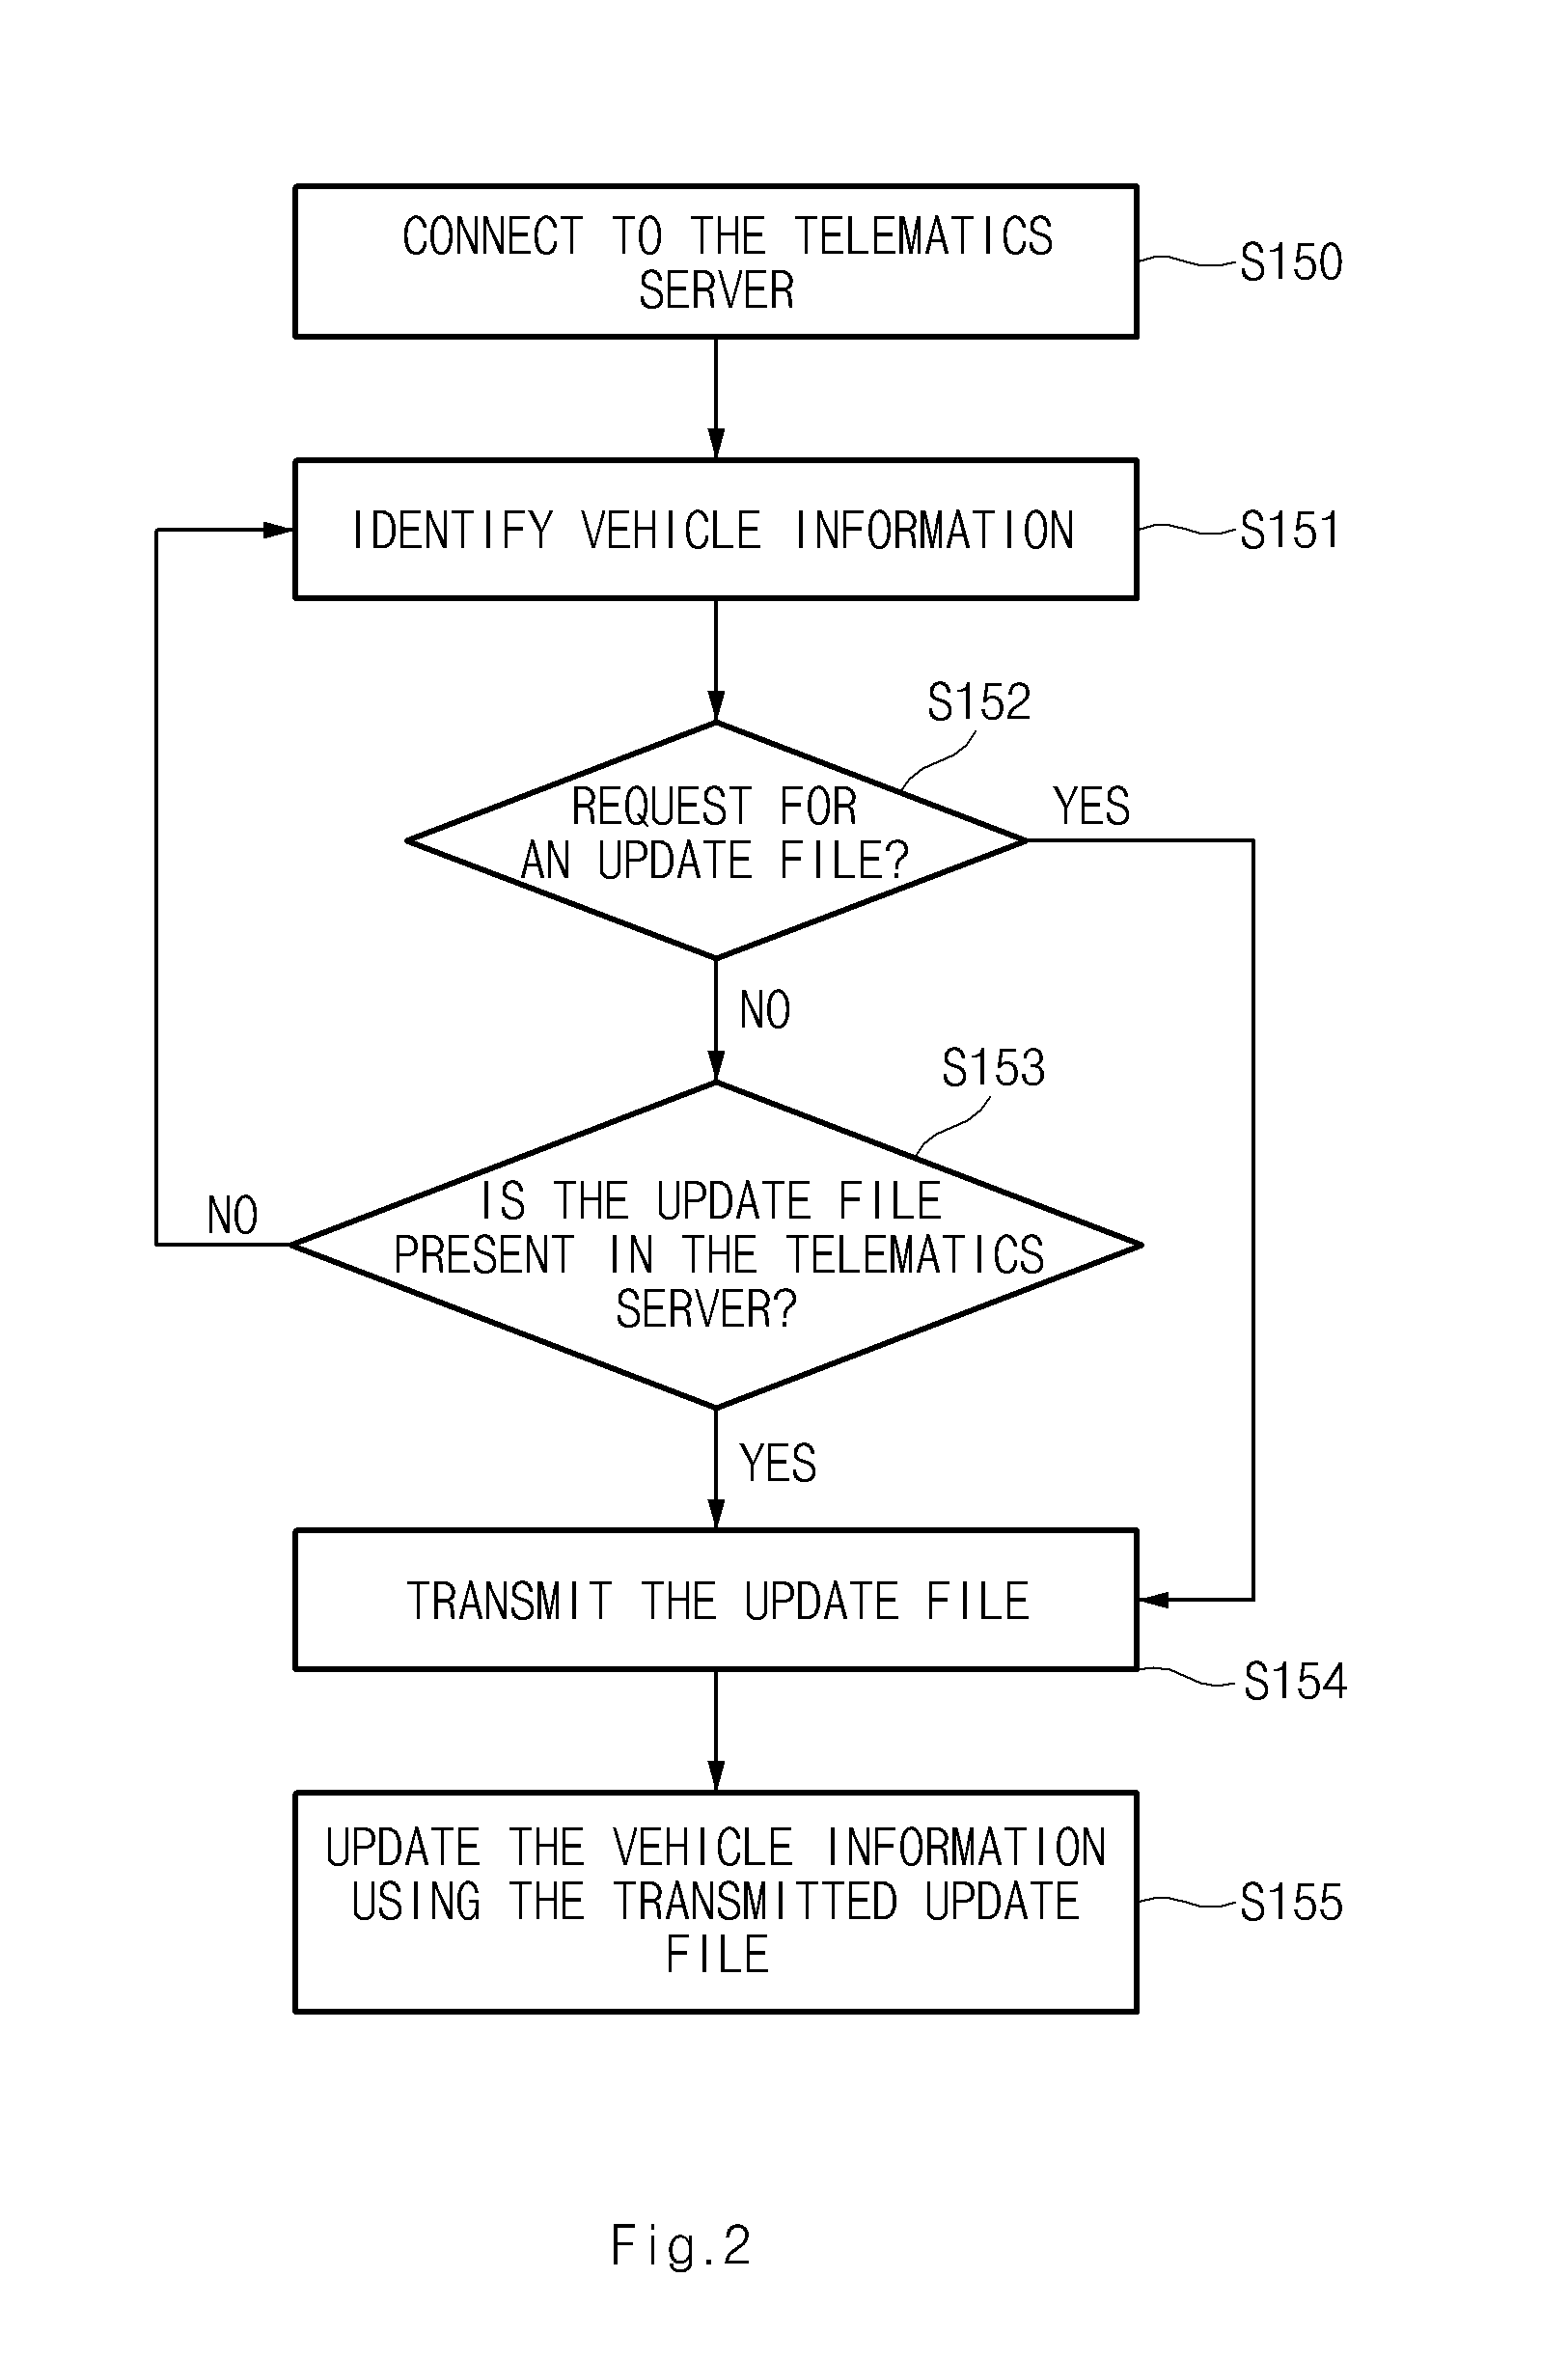 System and method for updating vehicle information using wireless access point connected to telematics server